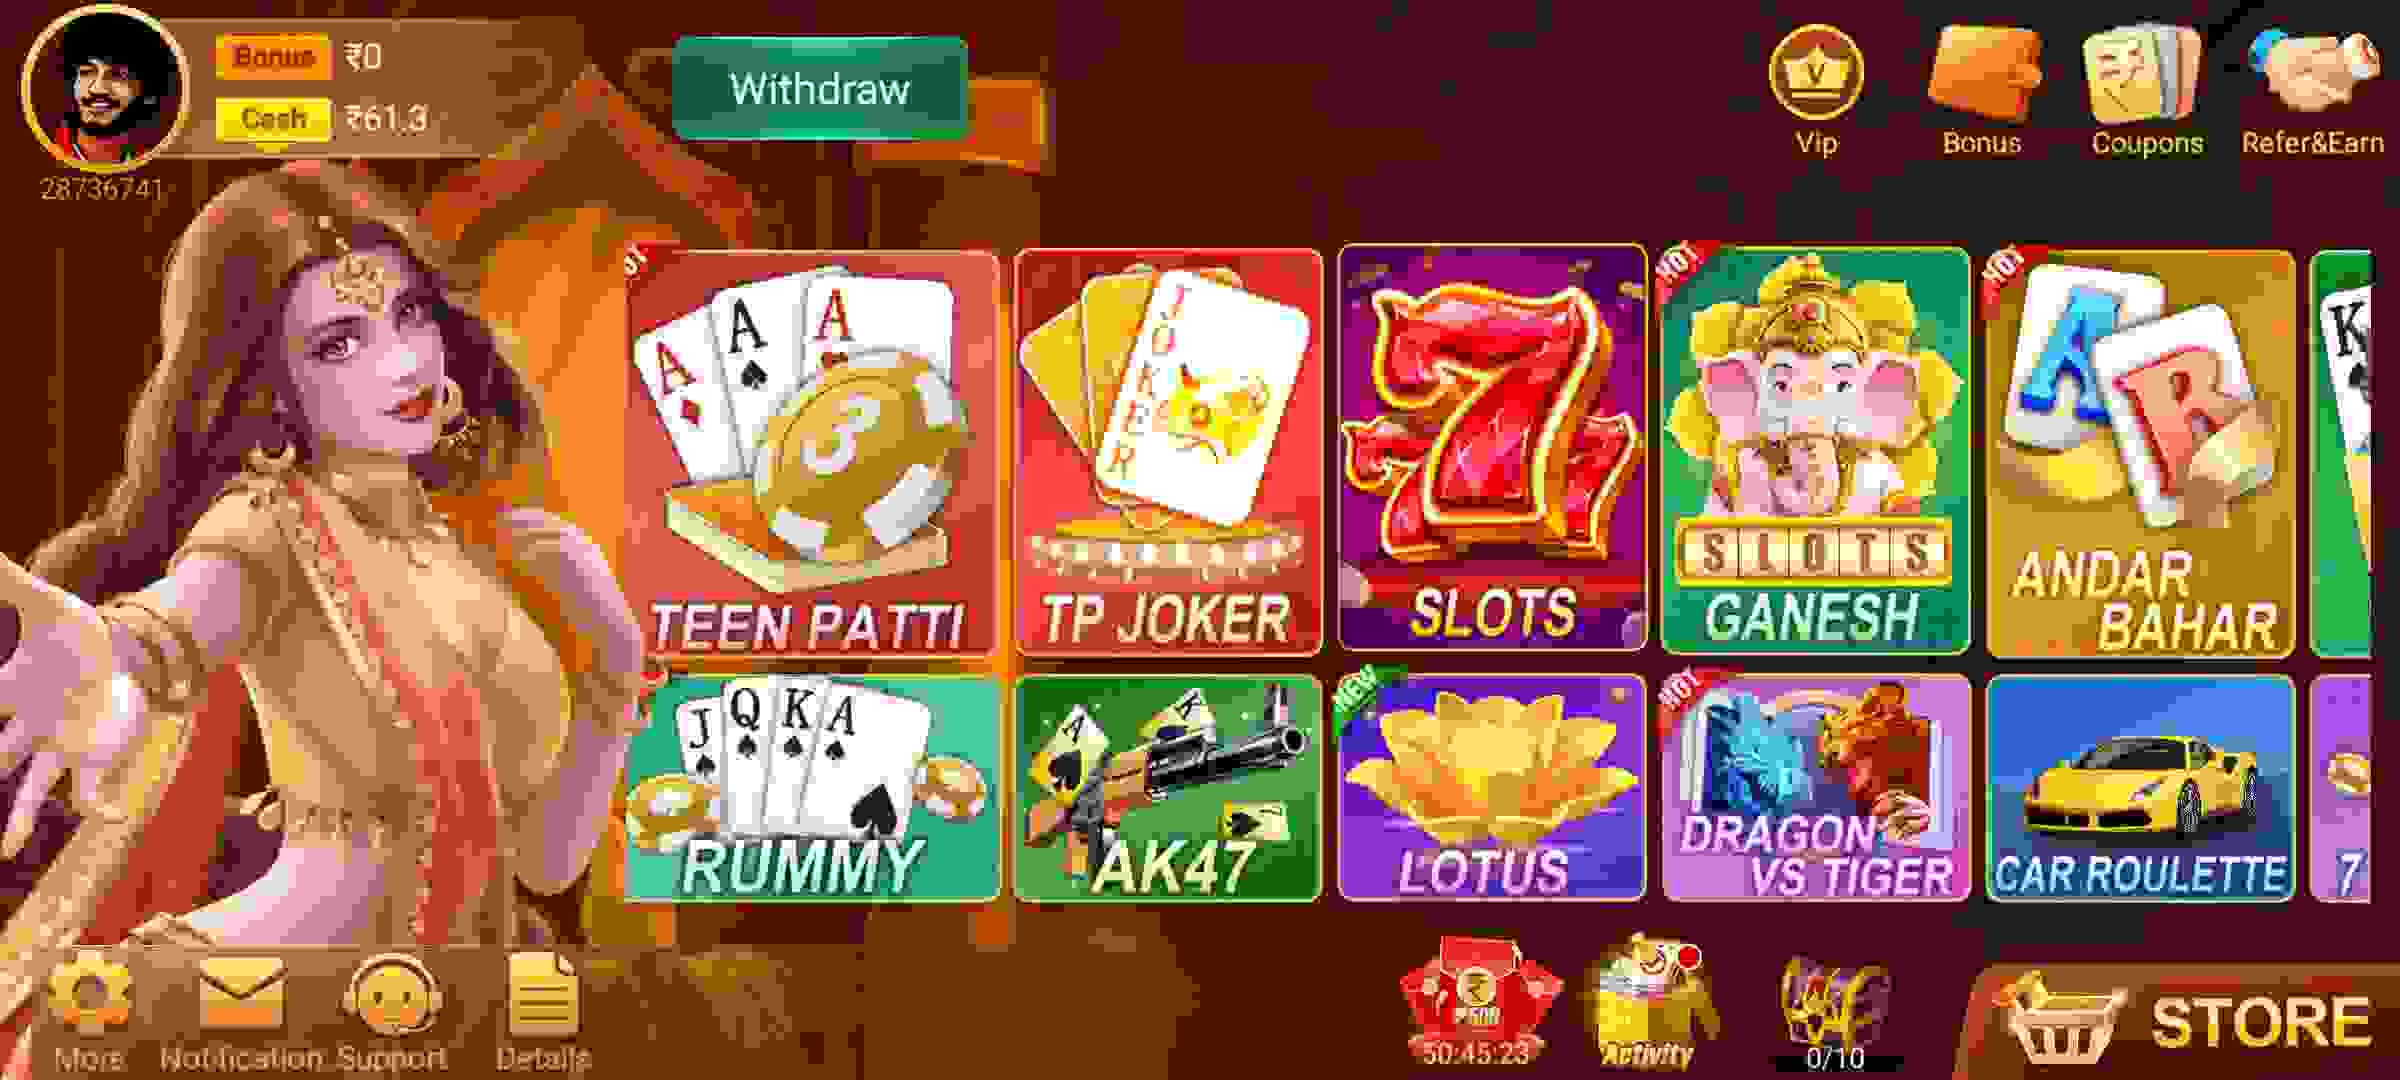 Games Available in Teen Patti Top Online APK